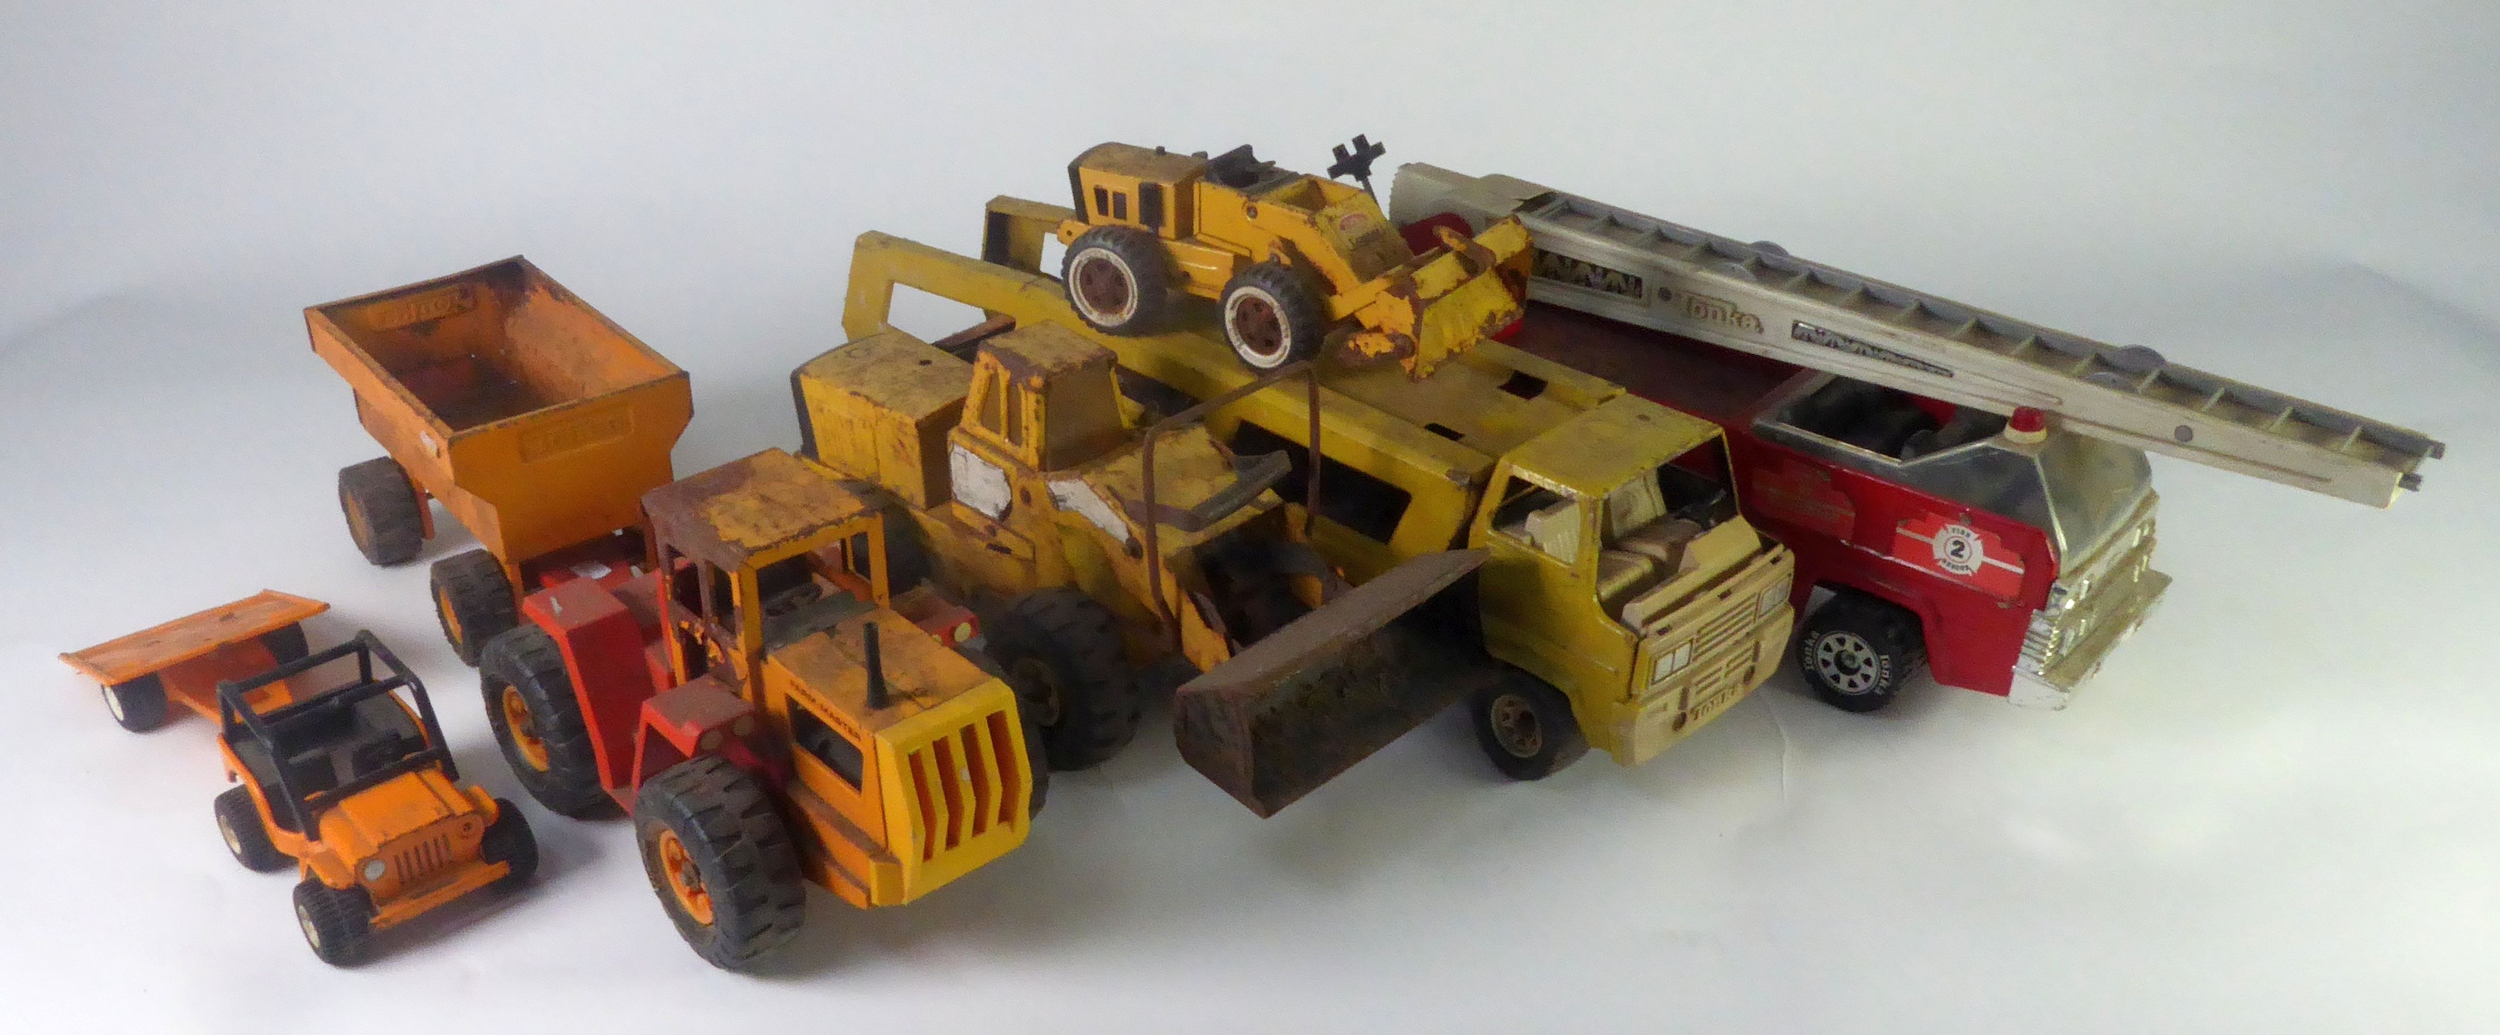 TONKA: Vintage Tonka XR101 Transporter, Fire 2 Rescue, and a Farm Master and trailer, plus smaller